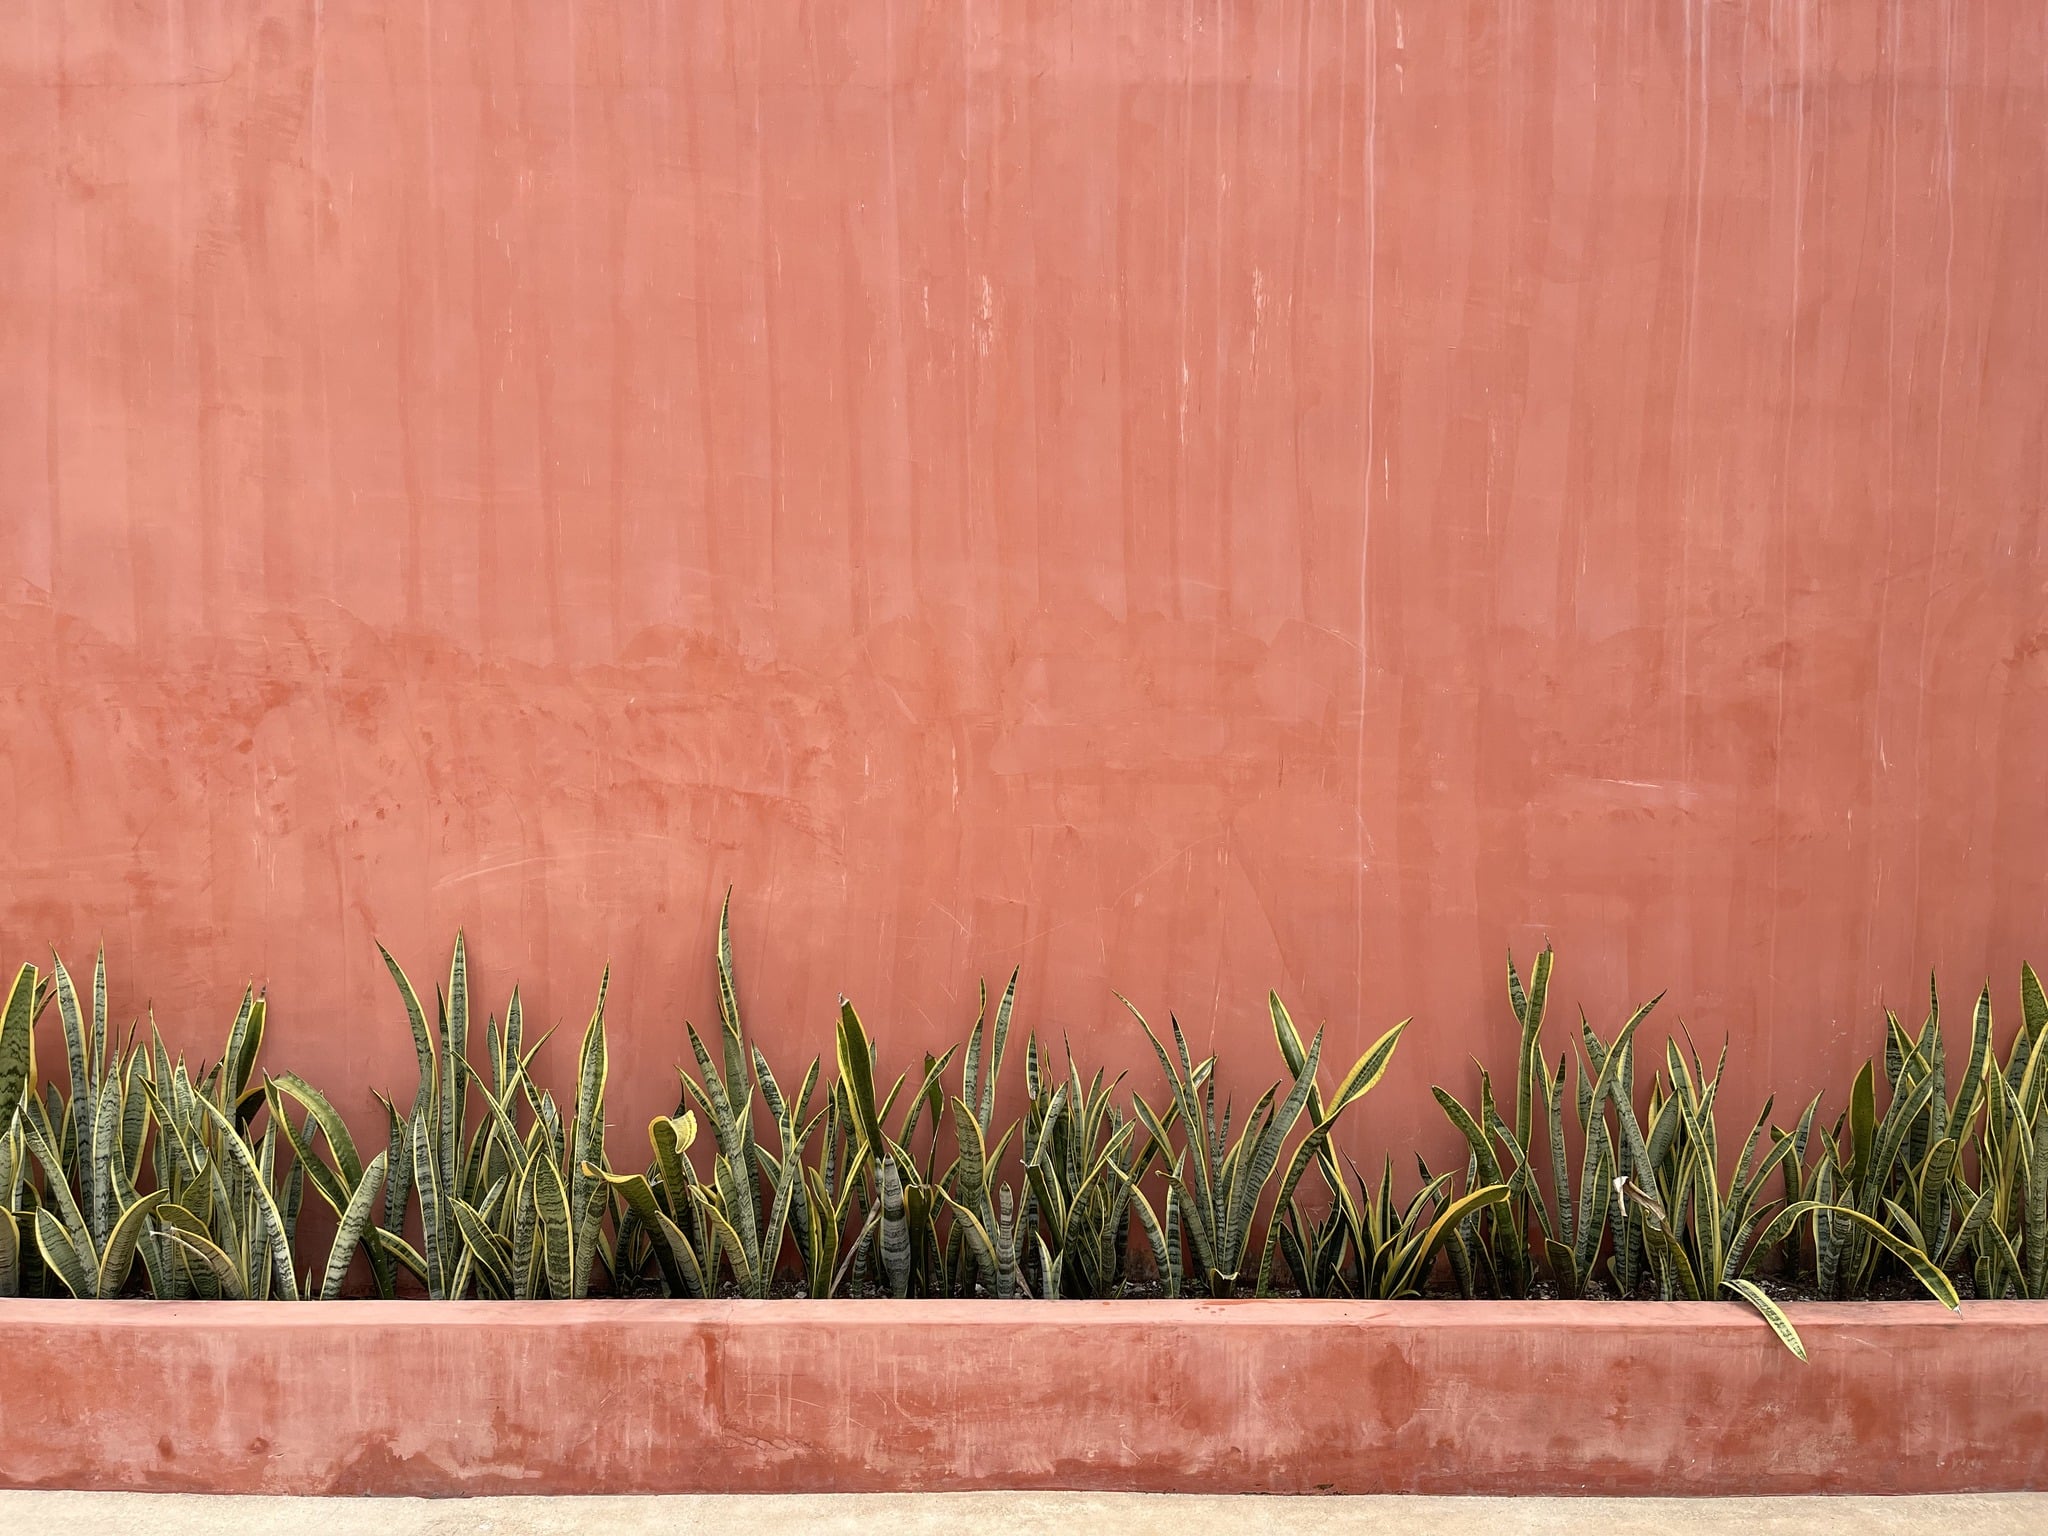 Plants in a stone bed along a terracotta-coloured wall.